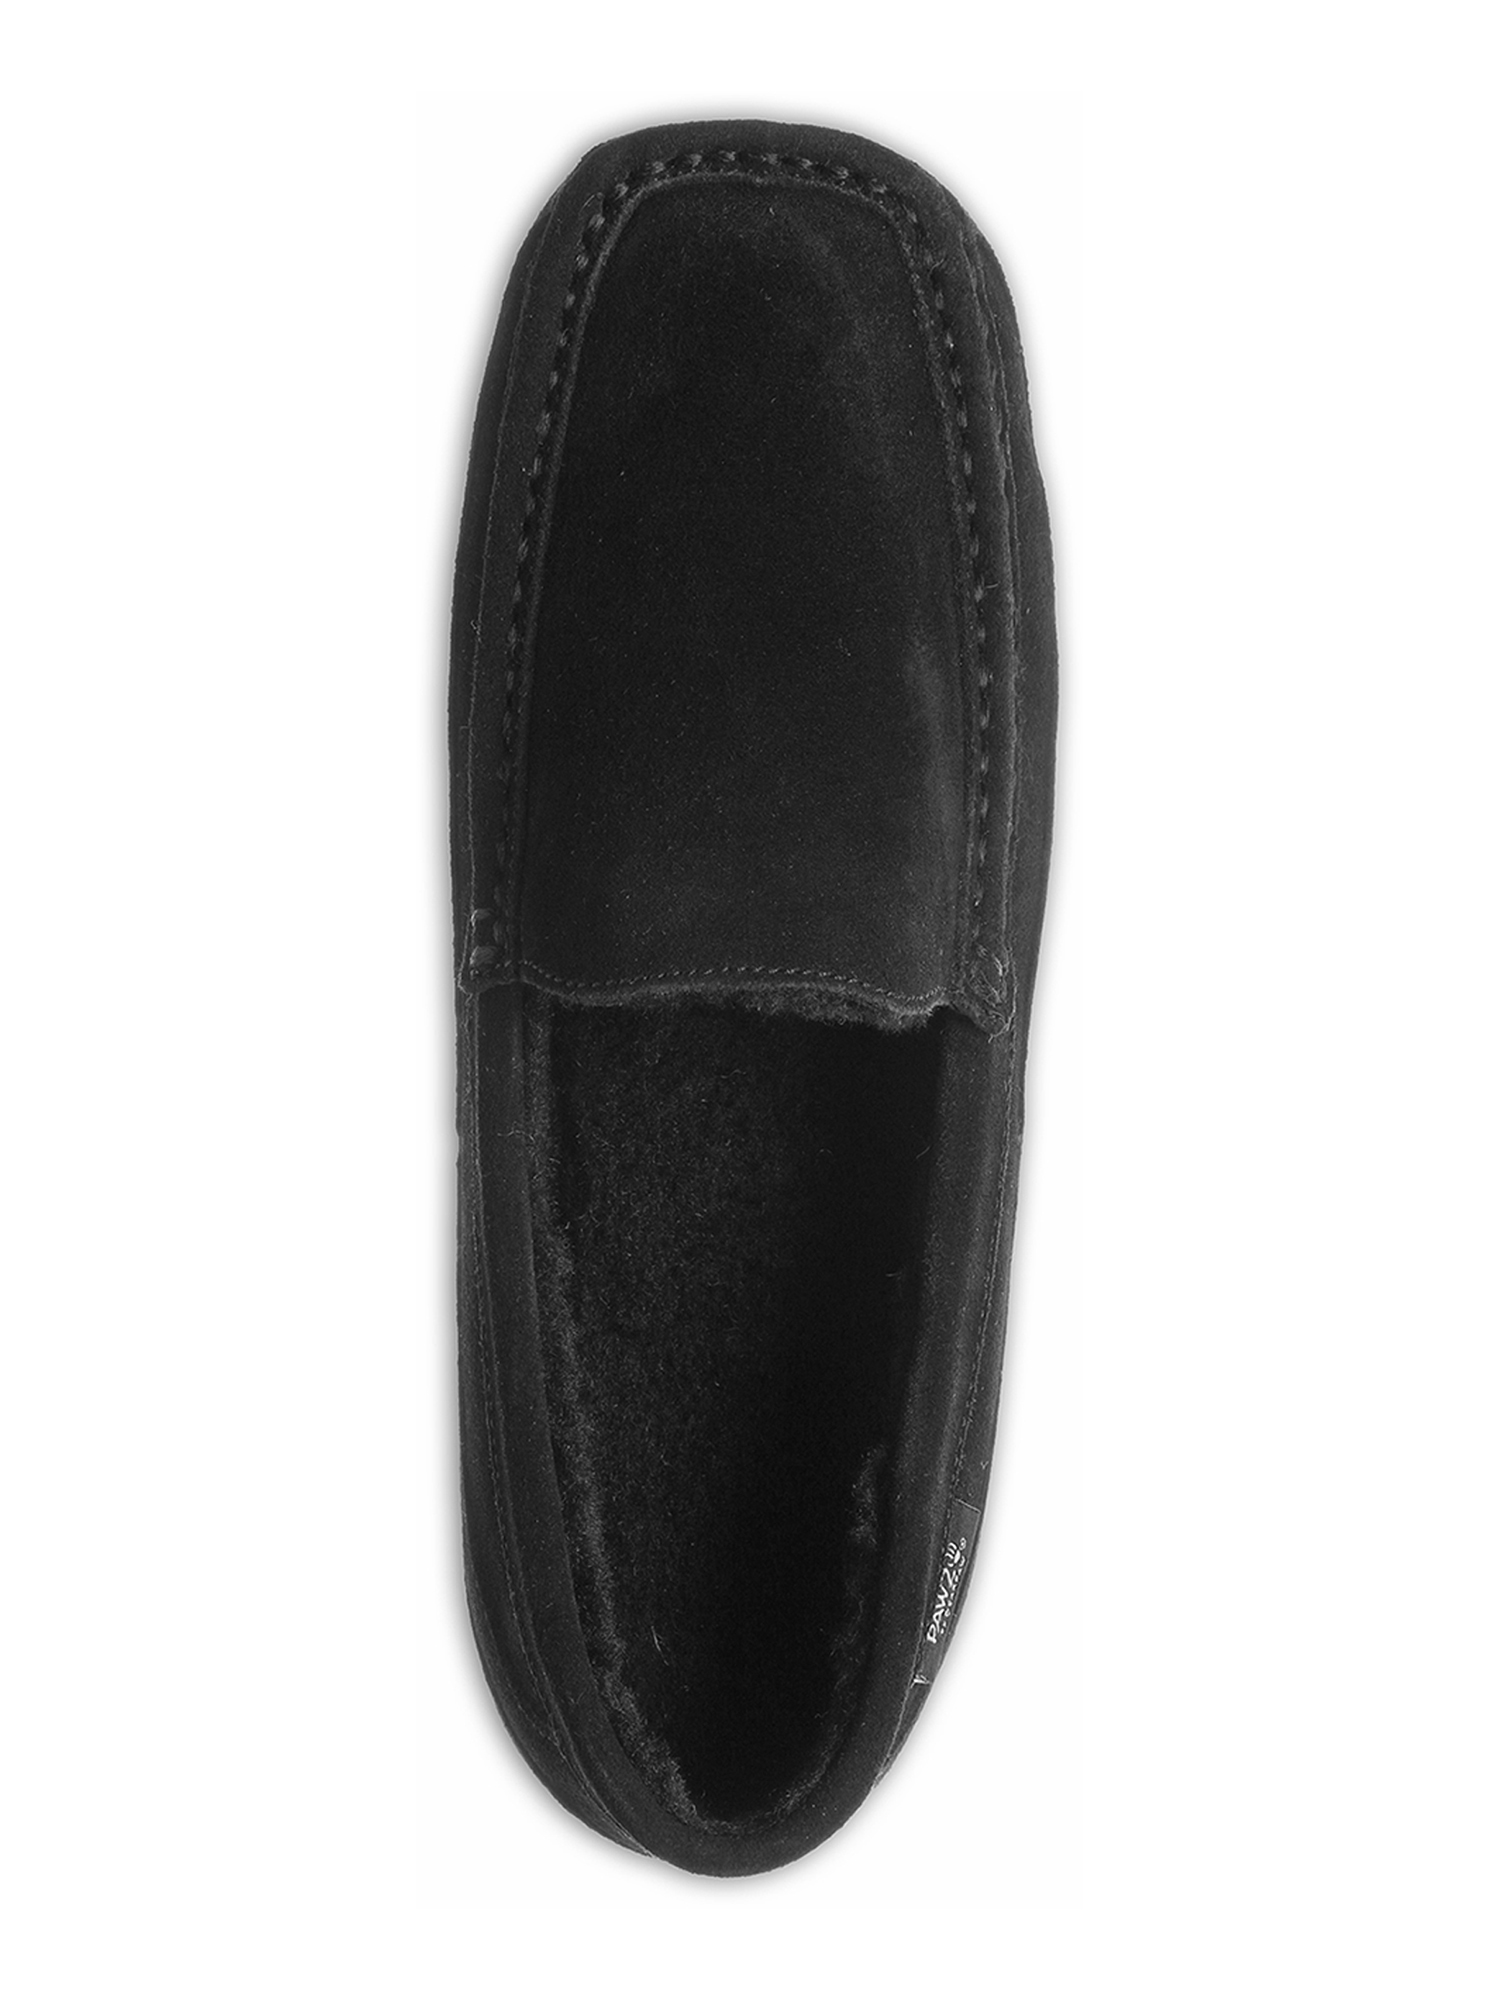 Pawz by Bearpaw Men's Caleb Genuine Suede Moccasin Slippers - image 3 of 5